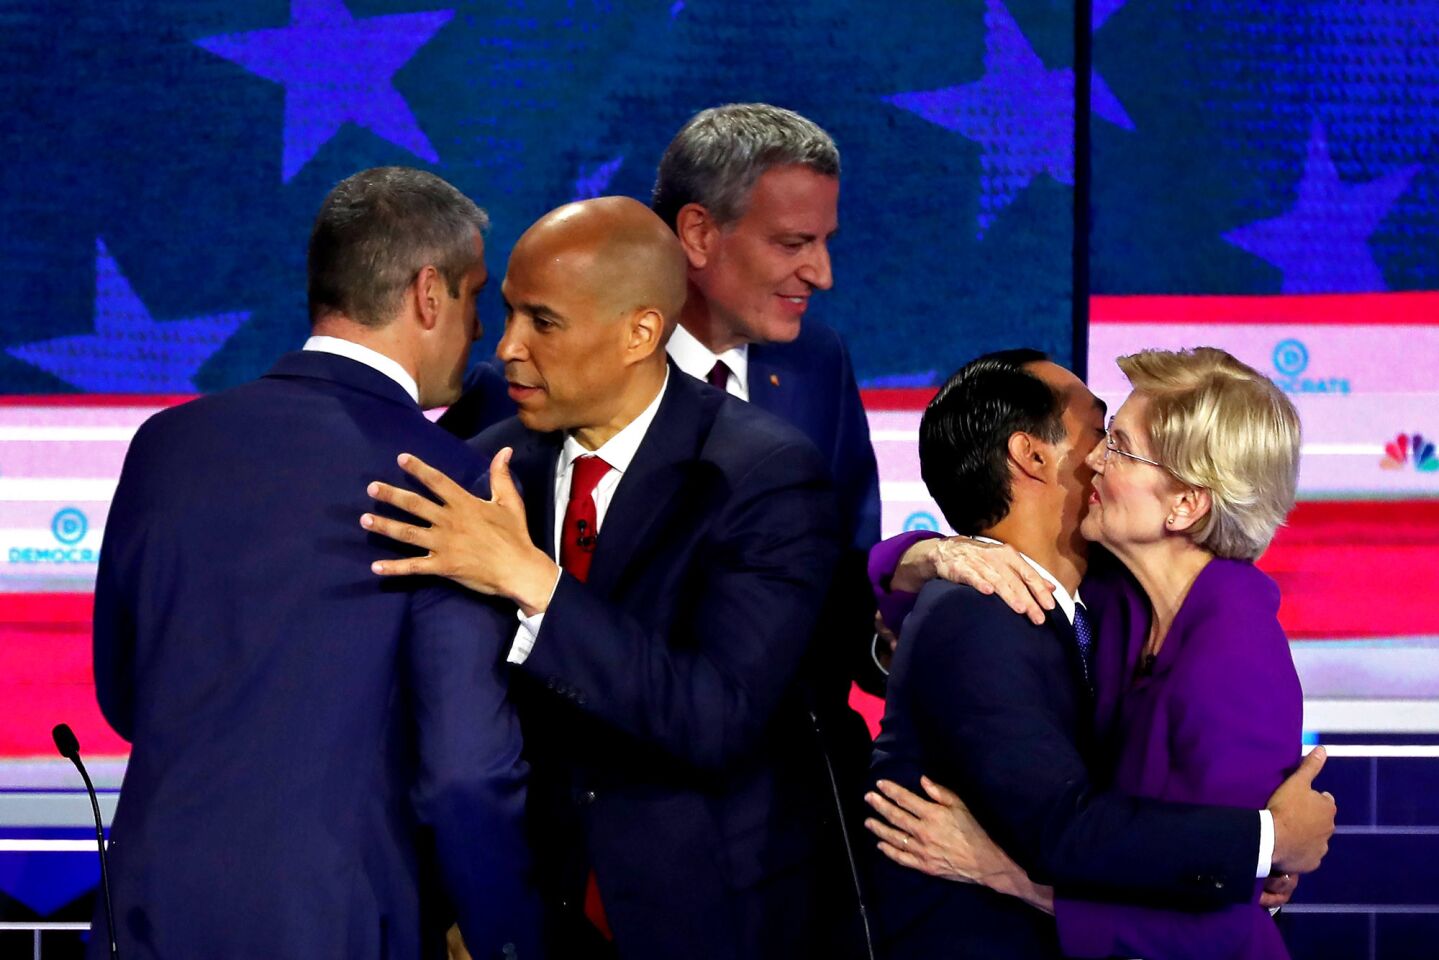 Rep. Tim Ryan (D-OH), Sen. Cory Booker (D-NJ), New York City Mayor Bill De Blasio, former housing secretary Julian Castro and Sen. Elizabeth Warren (D-MA) embrace after the first night of the Democratic presidential debate on June 26, 2019 in Miami, Florida. A field of 20 Democratic presidential candidates was split into two groups of 10 for the first debate of the 2020 election, taking place over two nights at Knight Concert Hall of the Adrienne Arsht Center for the Performing Arts of Miami-Dade County, hosted by NBC News, MSNBC, and Telemundo.